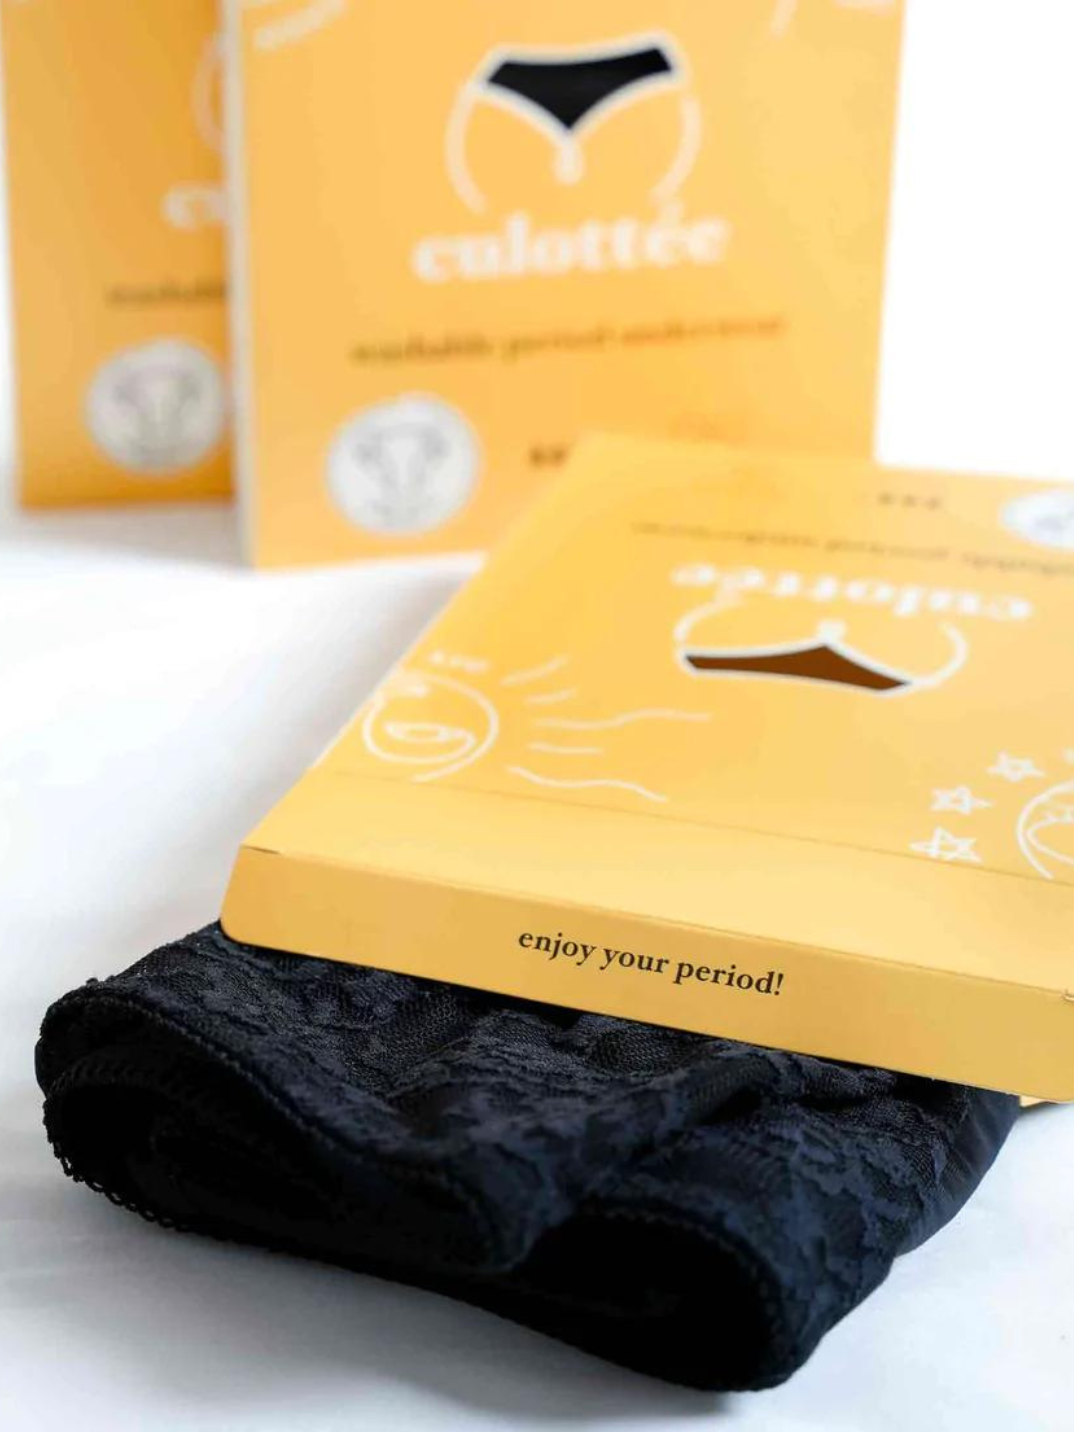 emma brief stylish cool period underwear zero waste reusable period panties eco-friendly women-owned sustainable brand